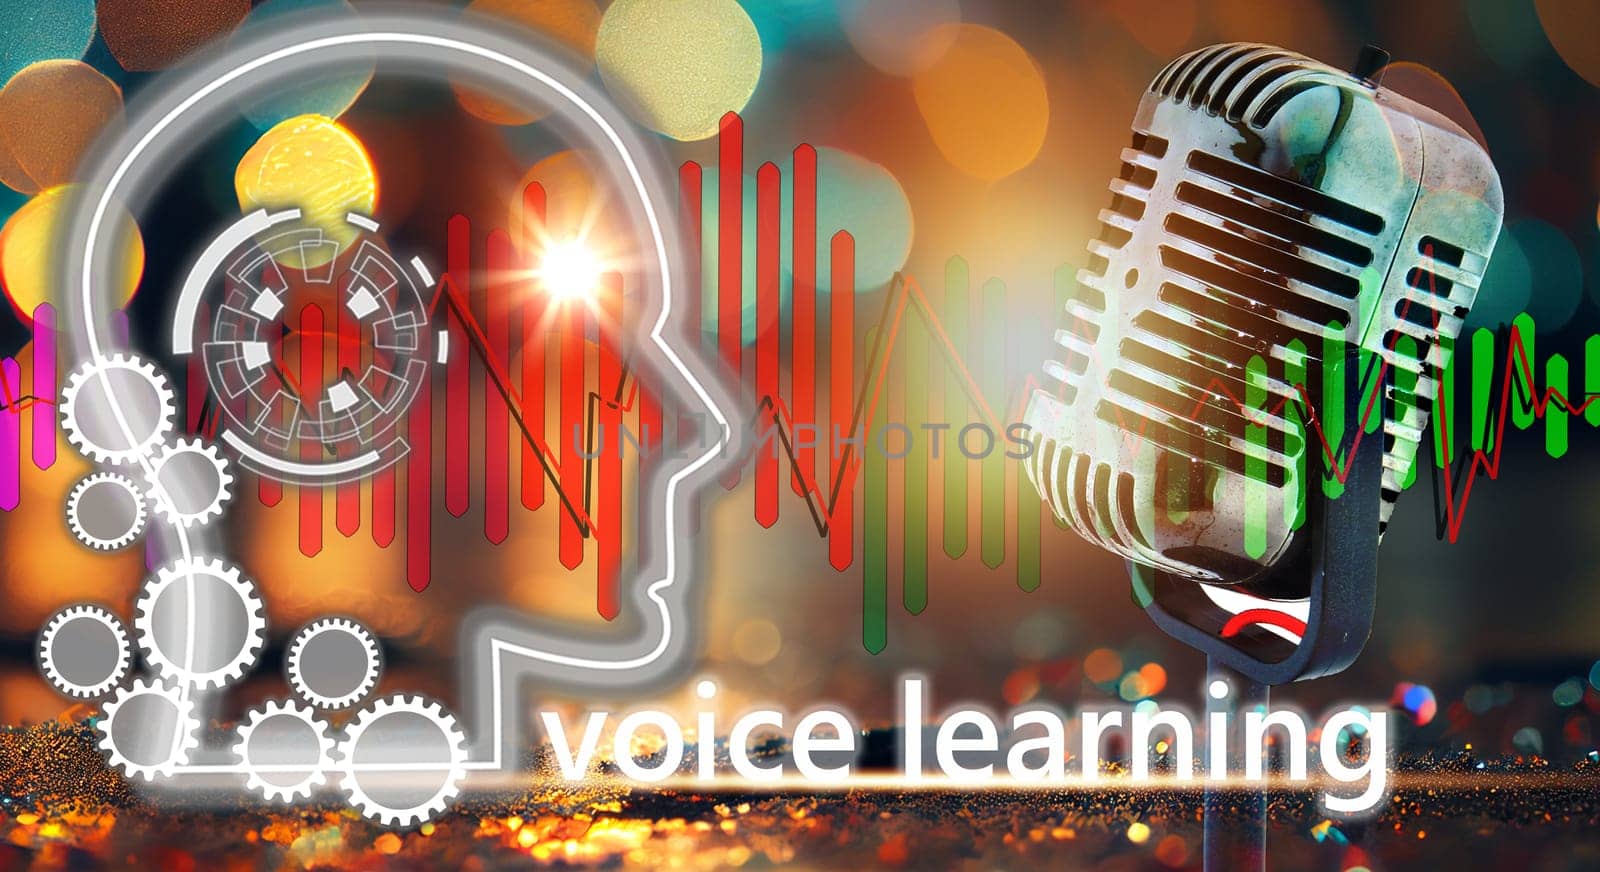 The concept of developing artificial intelligence to be able to learn human voices